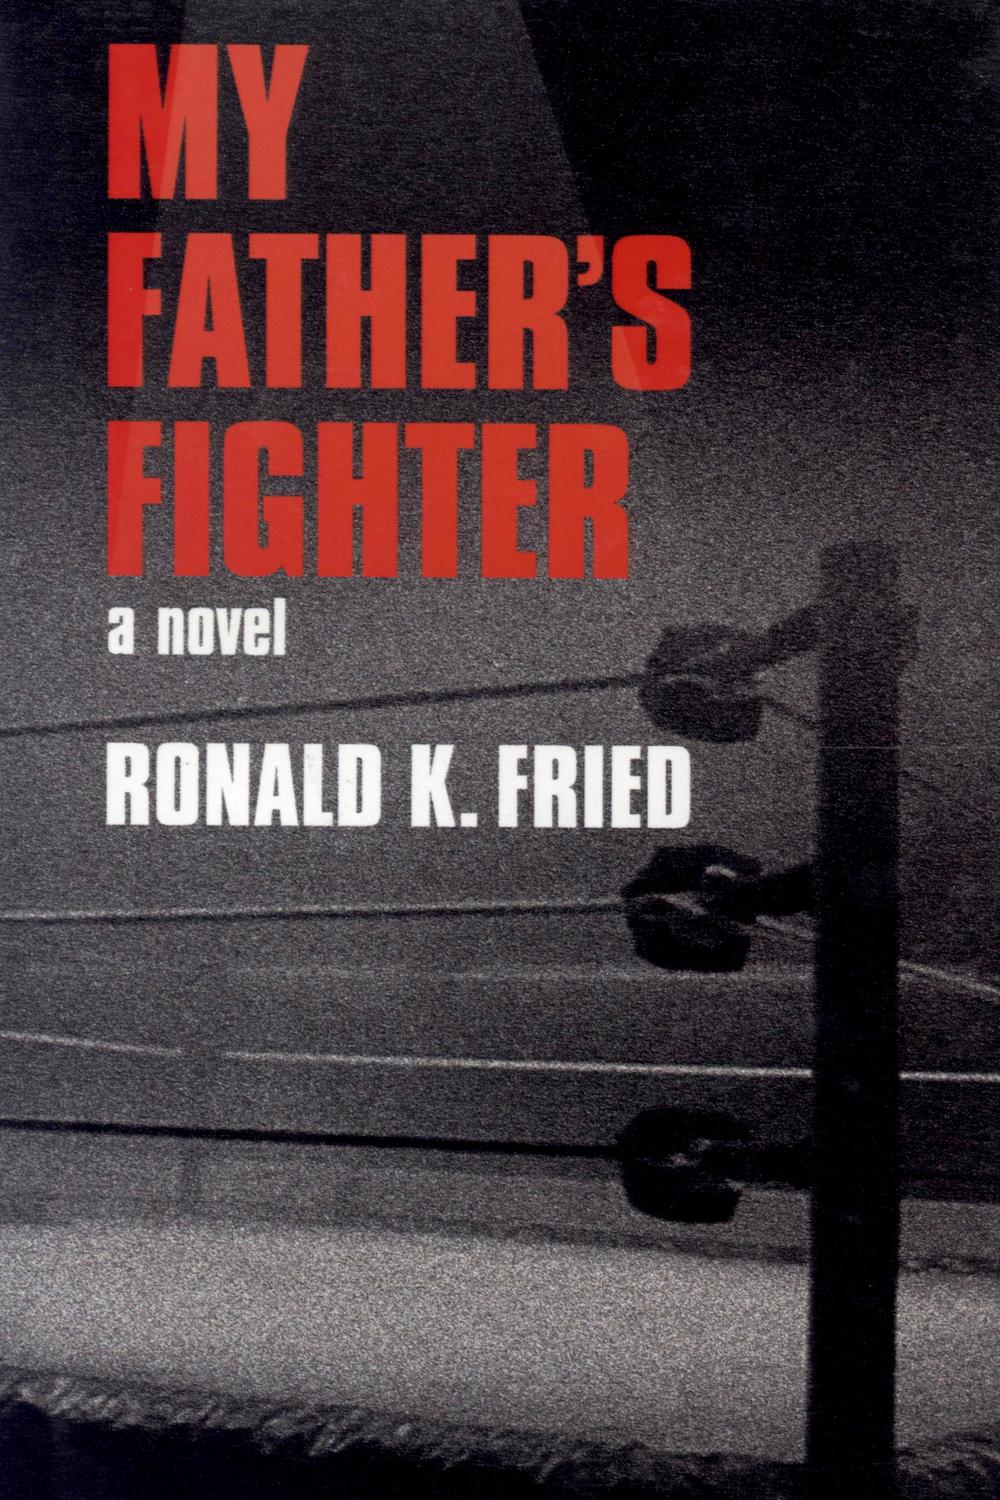 My Father's Fighter - Ronald K. Fried